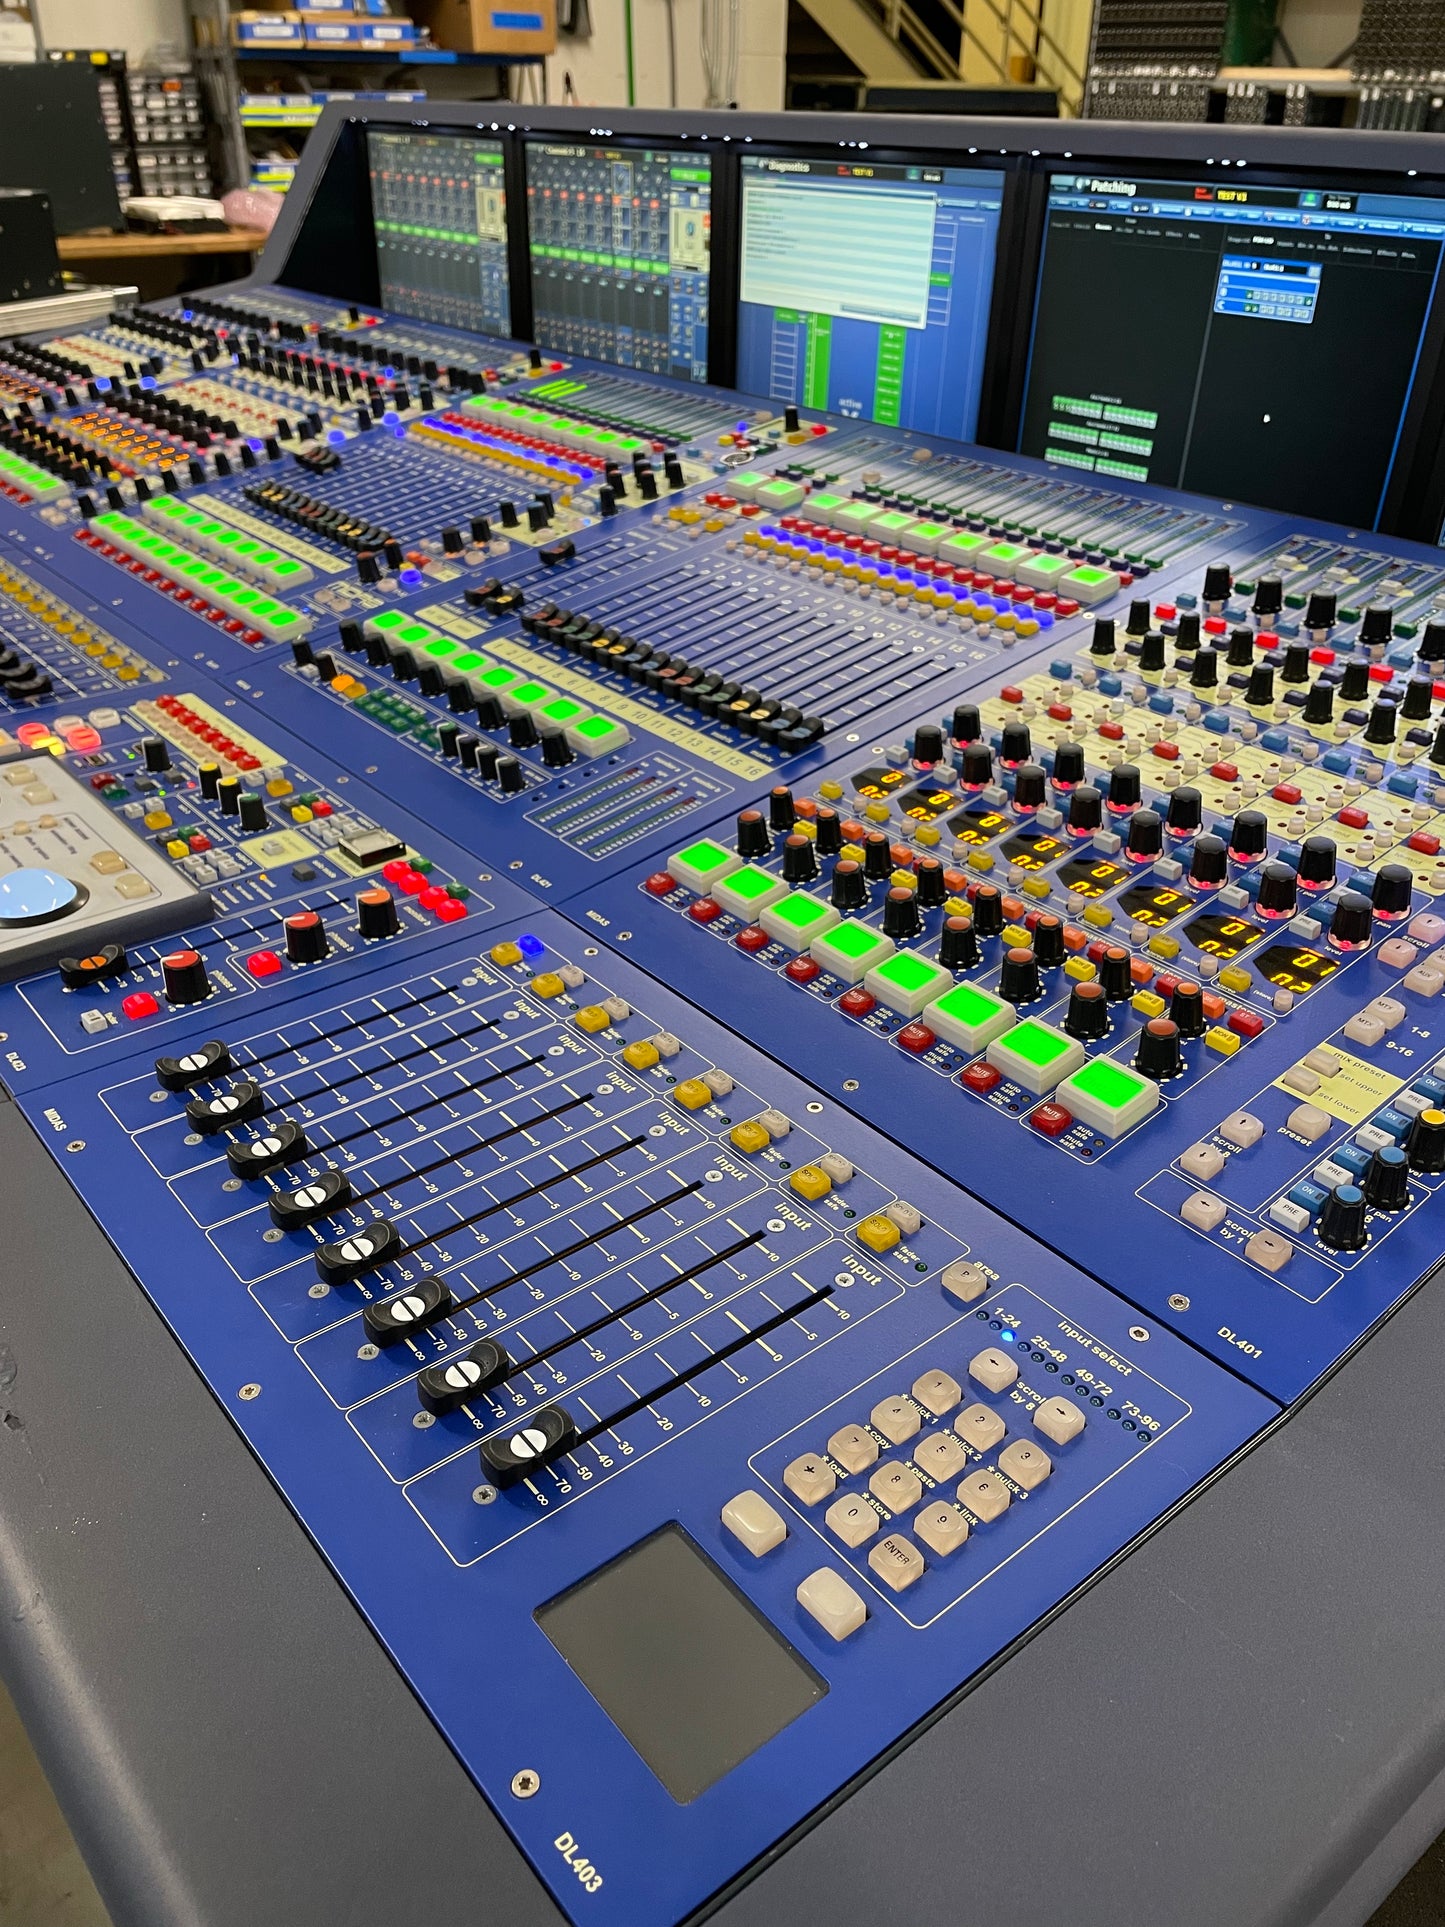 Midas XL8 Console Package w/Touring Case & 1x XL8 control surface. We Sell Professional Audio Equipment. Audio Systems, Amplifiers, Consoles, Mixers, Electronics, Entertainment, Sound, Live.